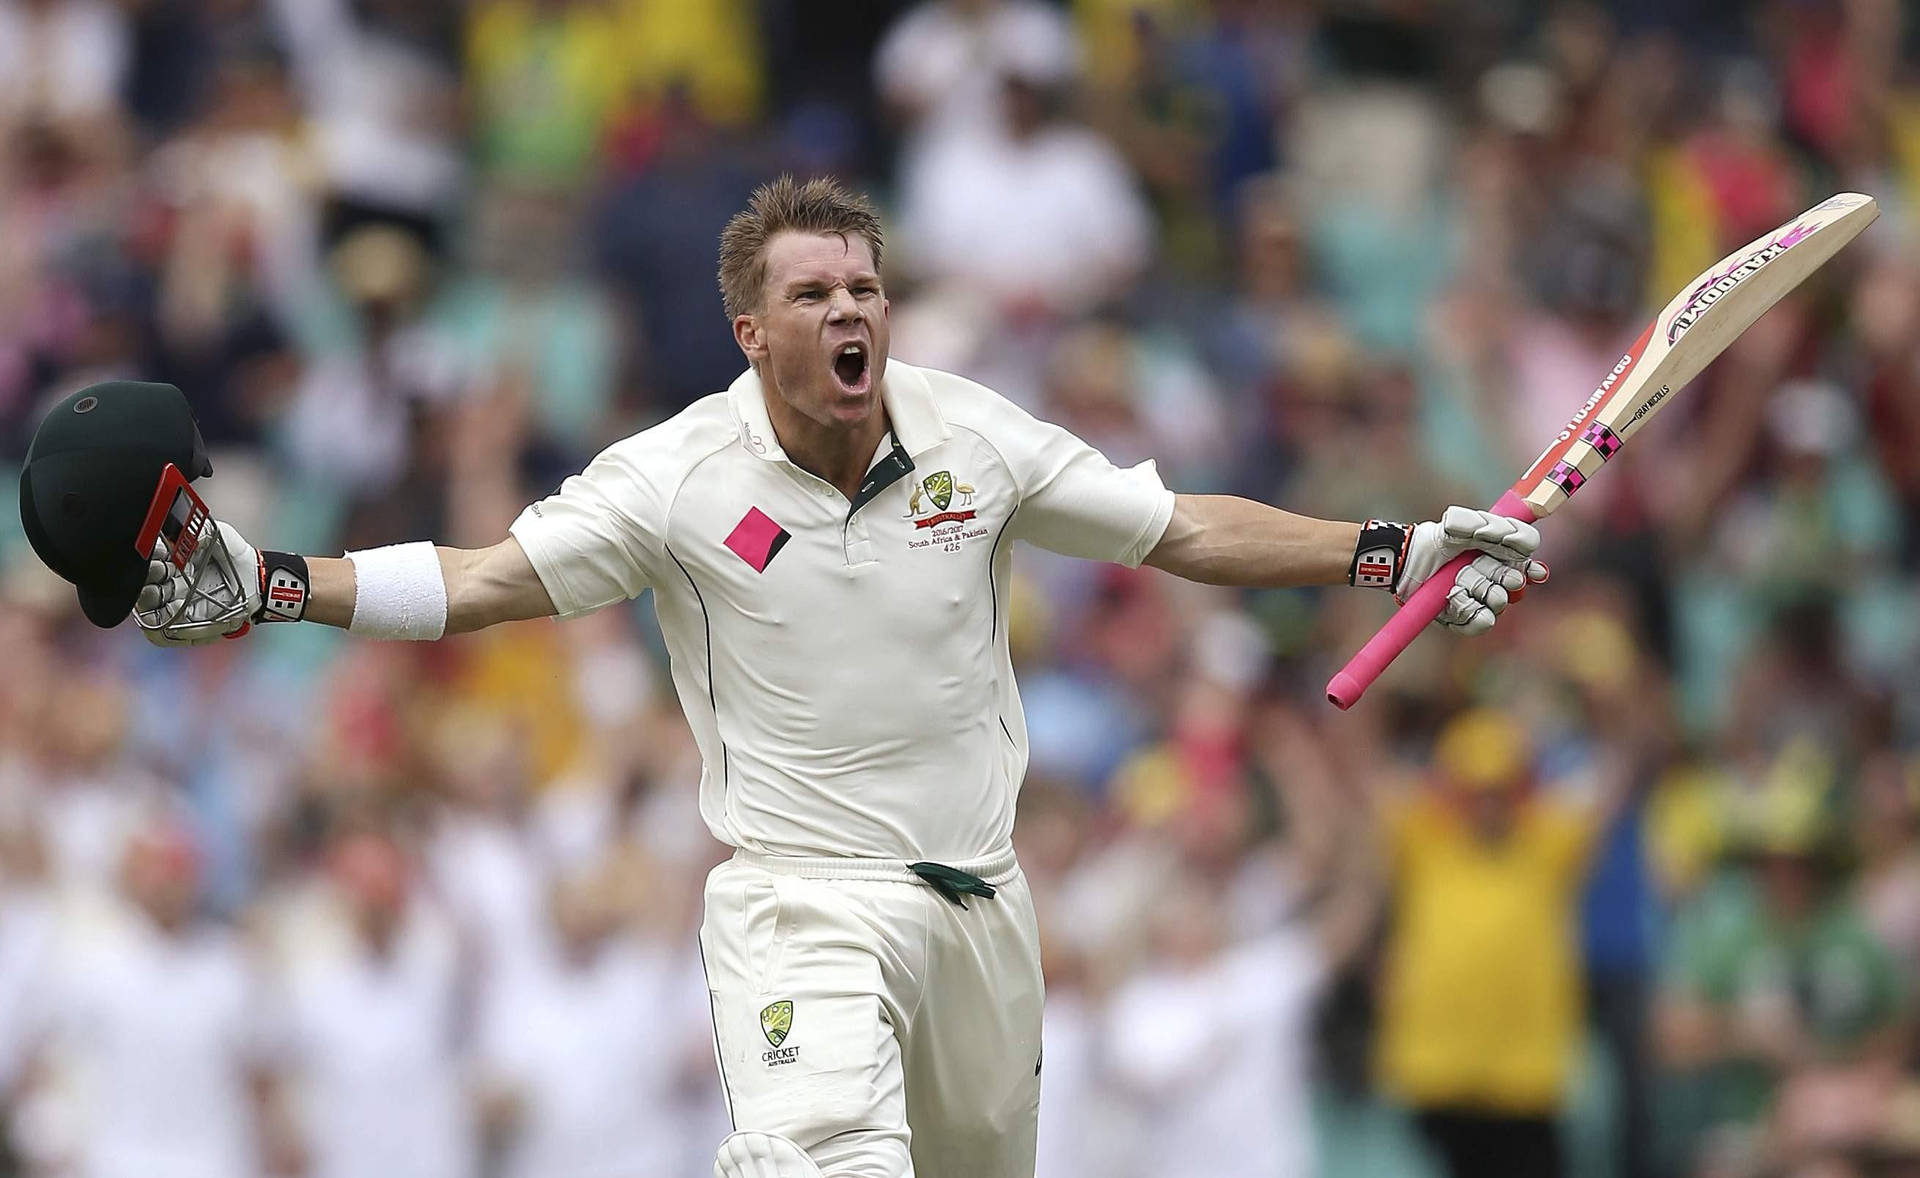 Caption: David Warner Expresses Intensity On The Field Background